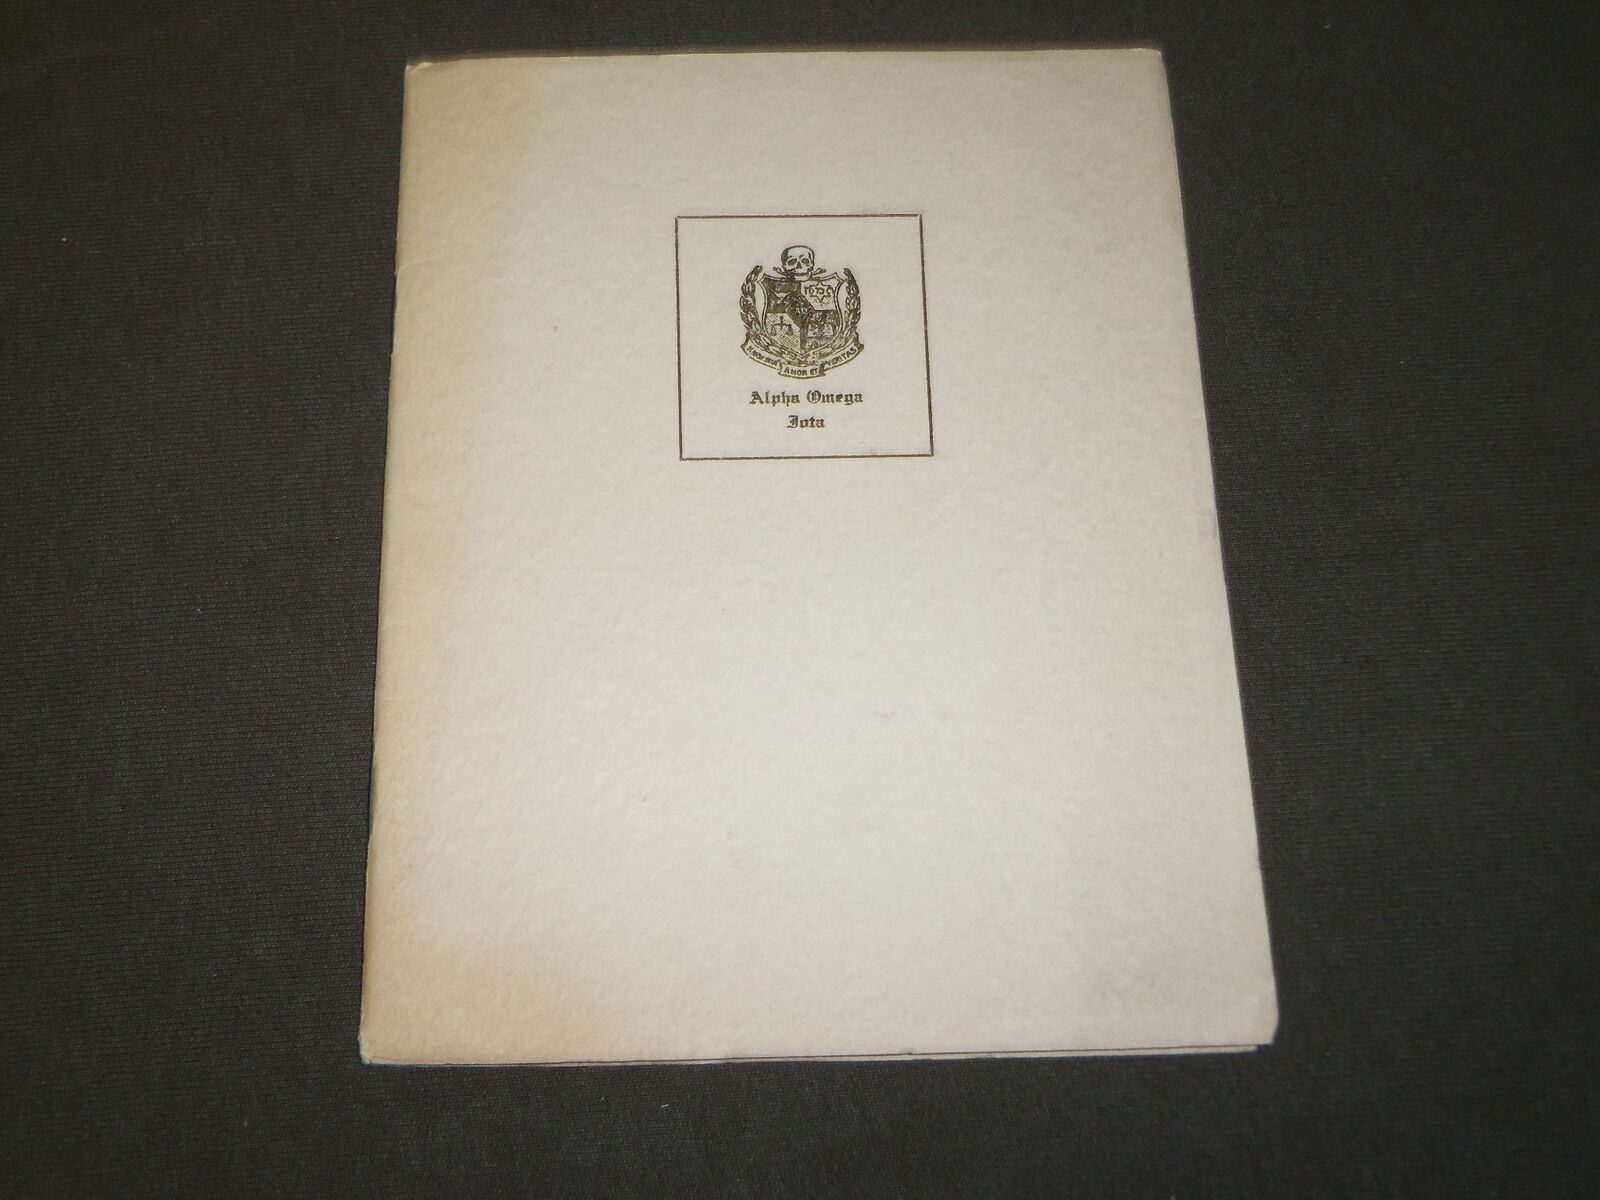 1923 NY COLLEGE OF DENTISTRY IOTA CHAPTER BANQUET PROGRAM - J 3665